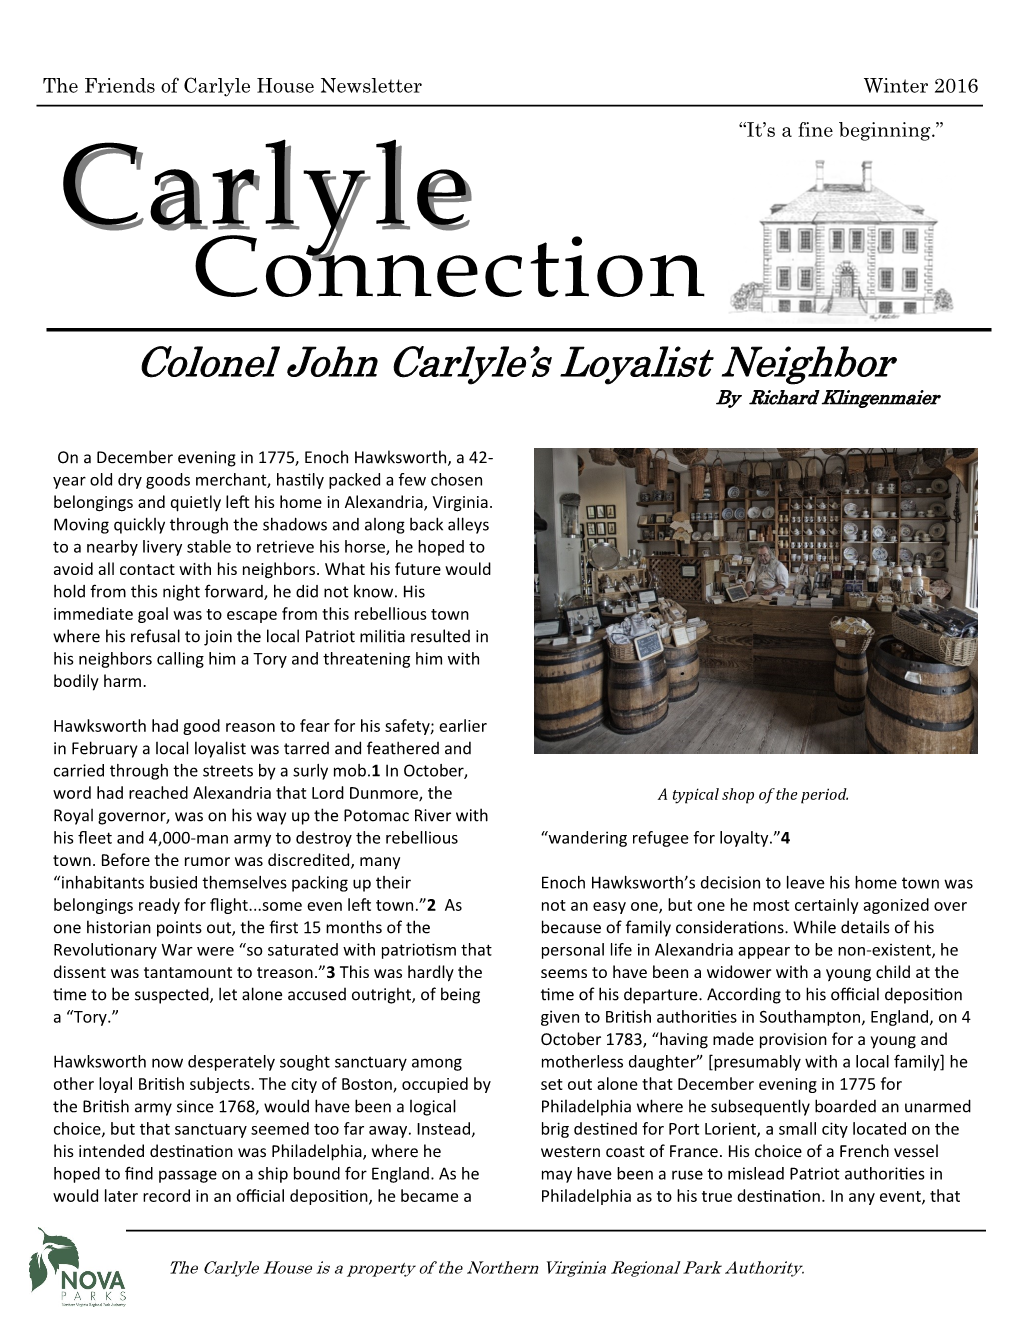 Carlyle Connection Colonel John Carlyle’S Loyalist Neighbor by Richard Klingenmaier